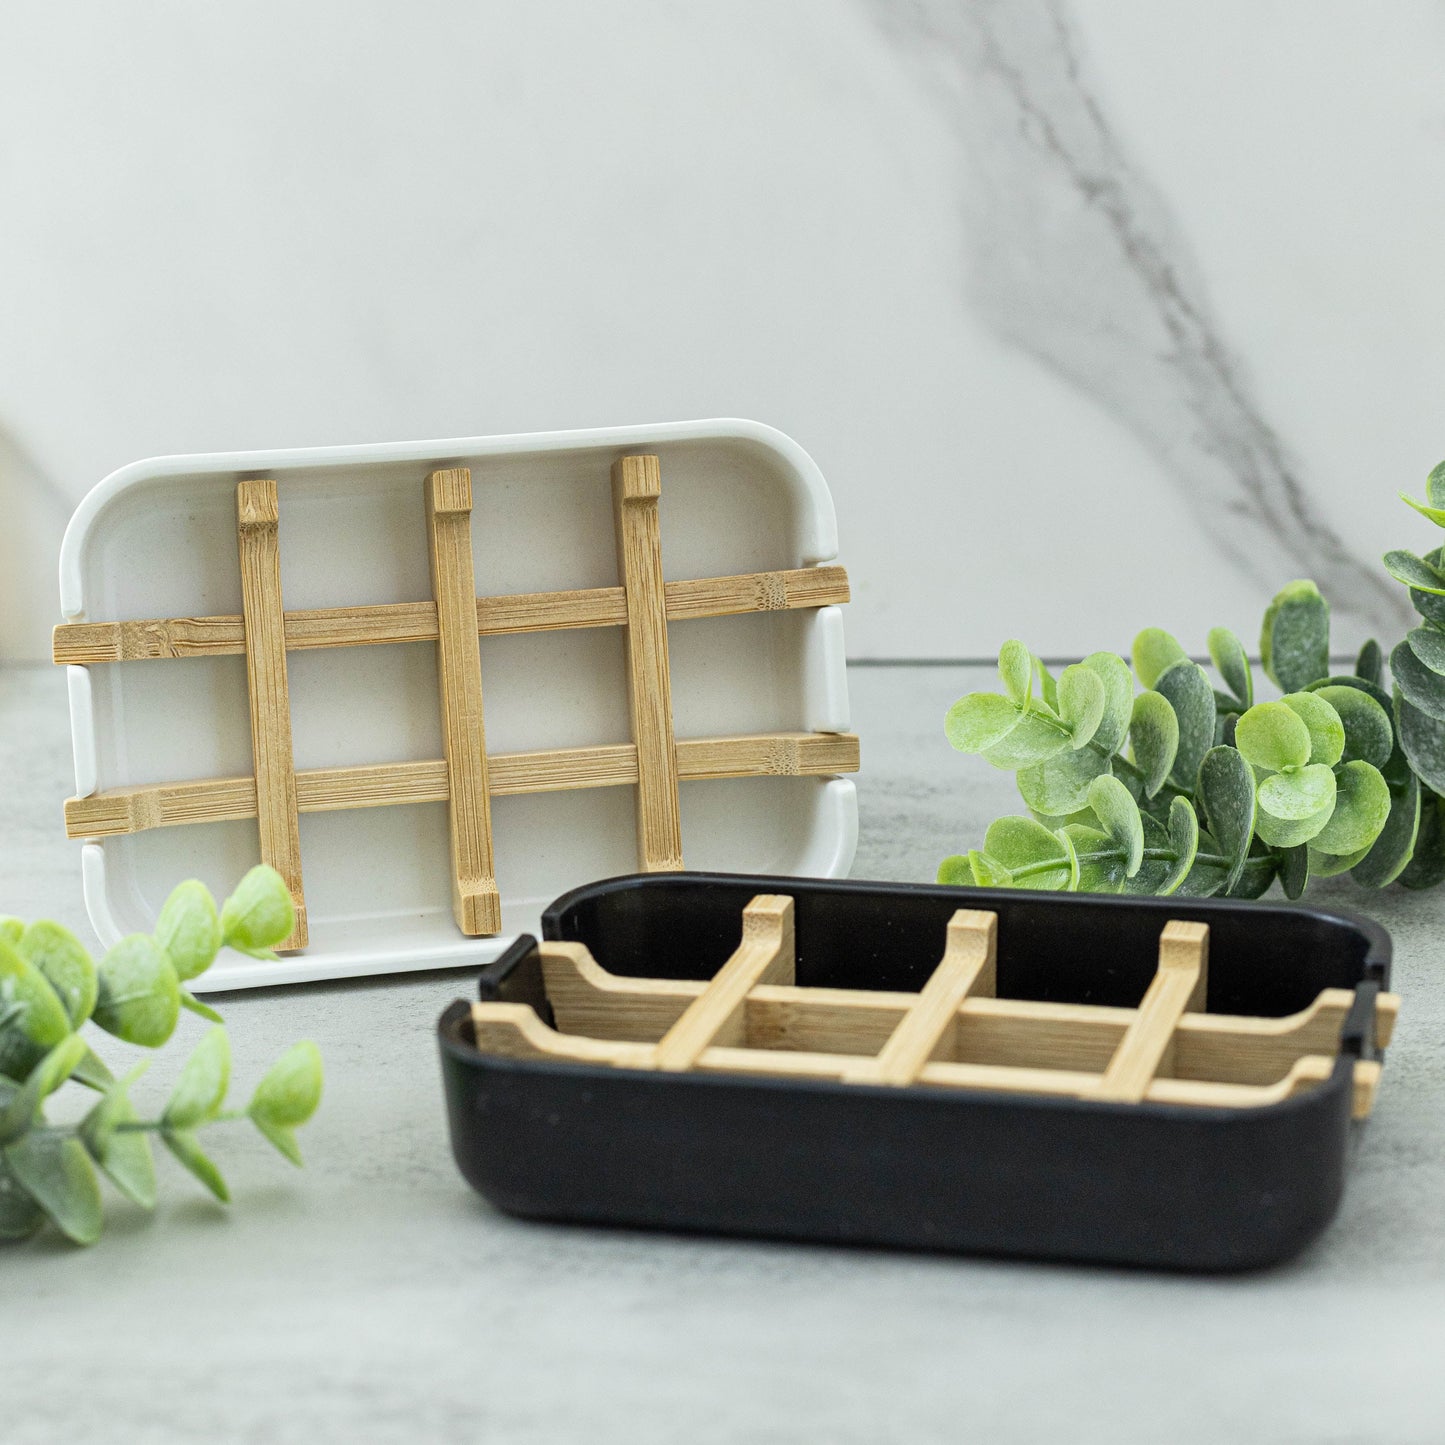 Plant Fiber Soap Dish with Bamboo Insert - Choice of Color-Bath Accessories-Perfectly Natural Soap